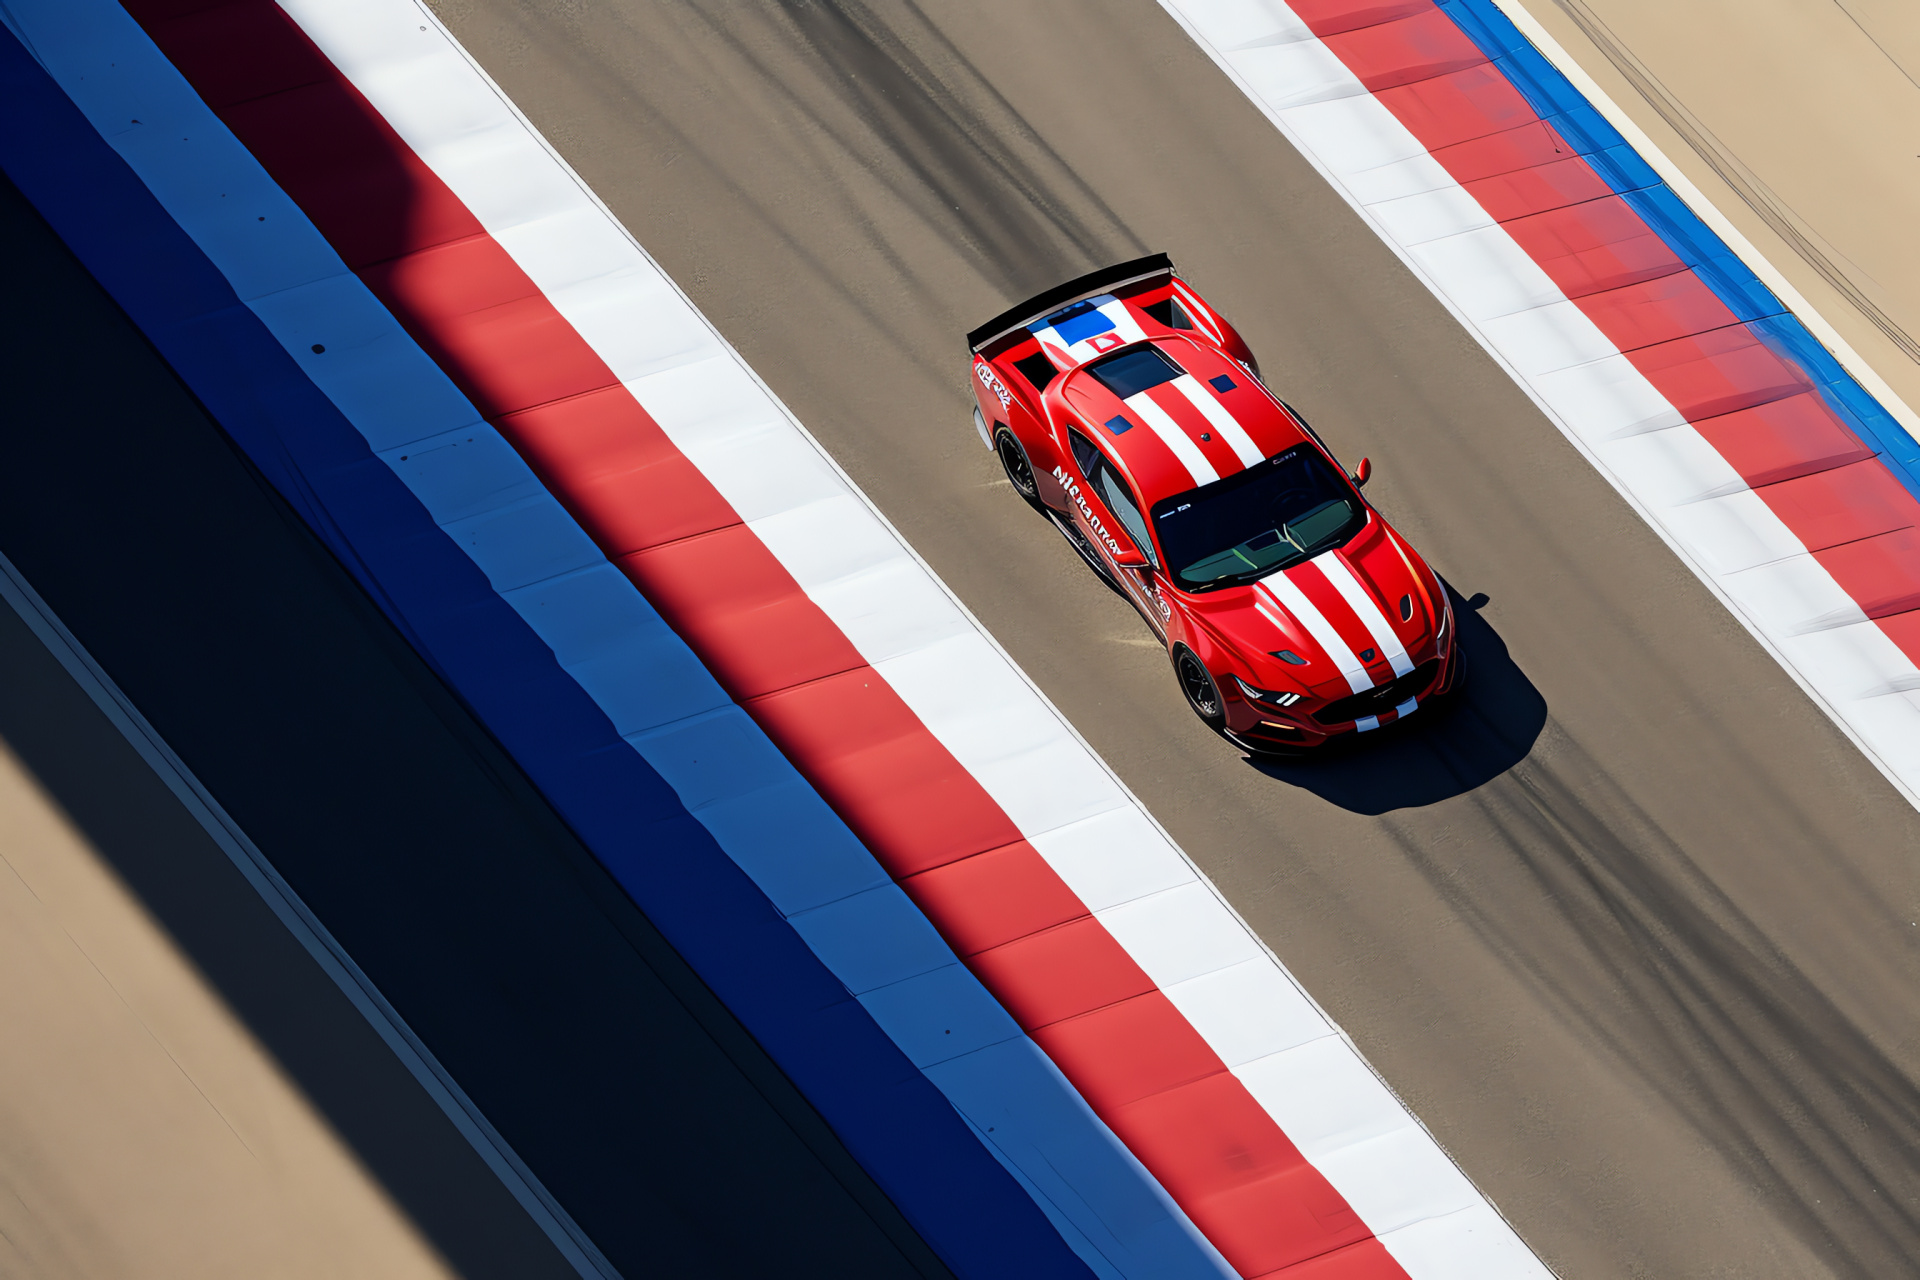 Ford Mustang GT4, Motorsport aerial view, Circuit of the Americas race, Grass track edge, Competitive racing car, HD Desktop Wallpaper